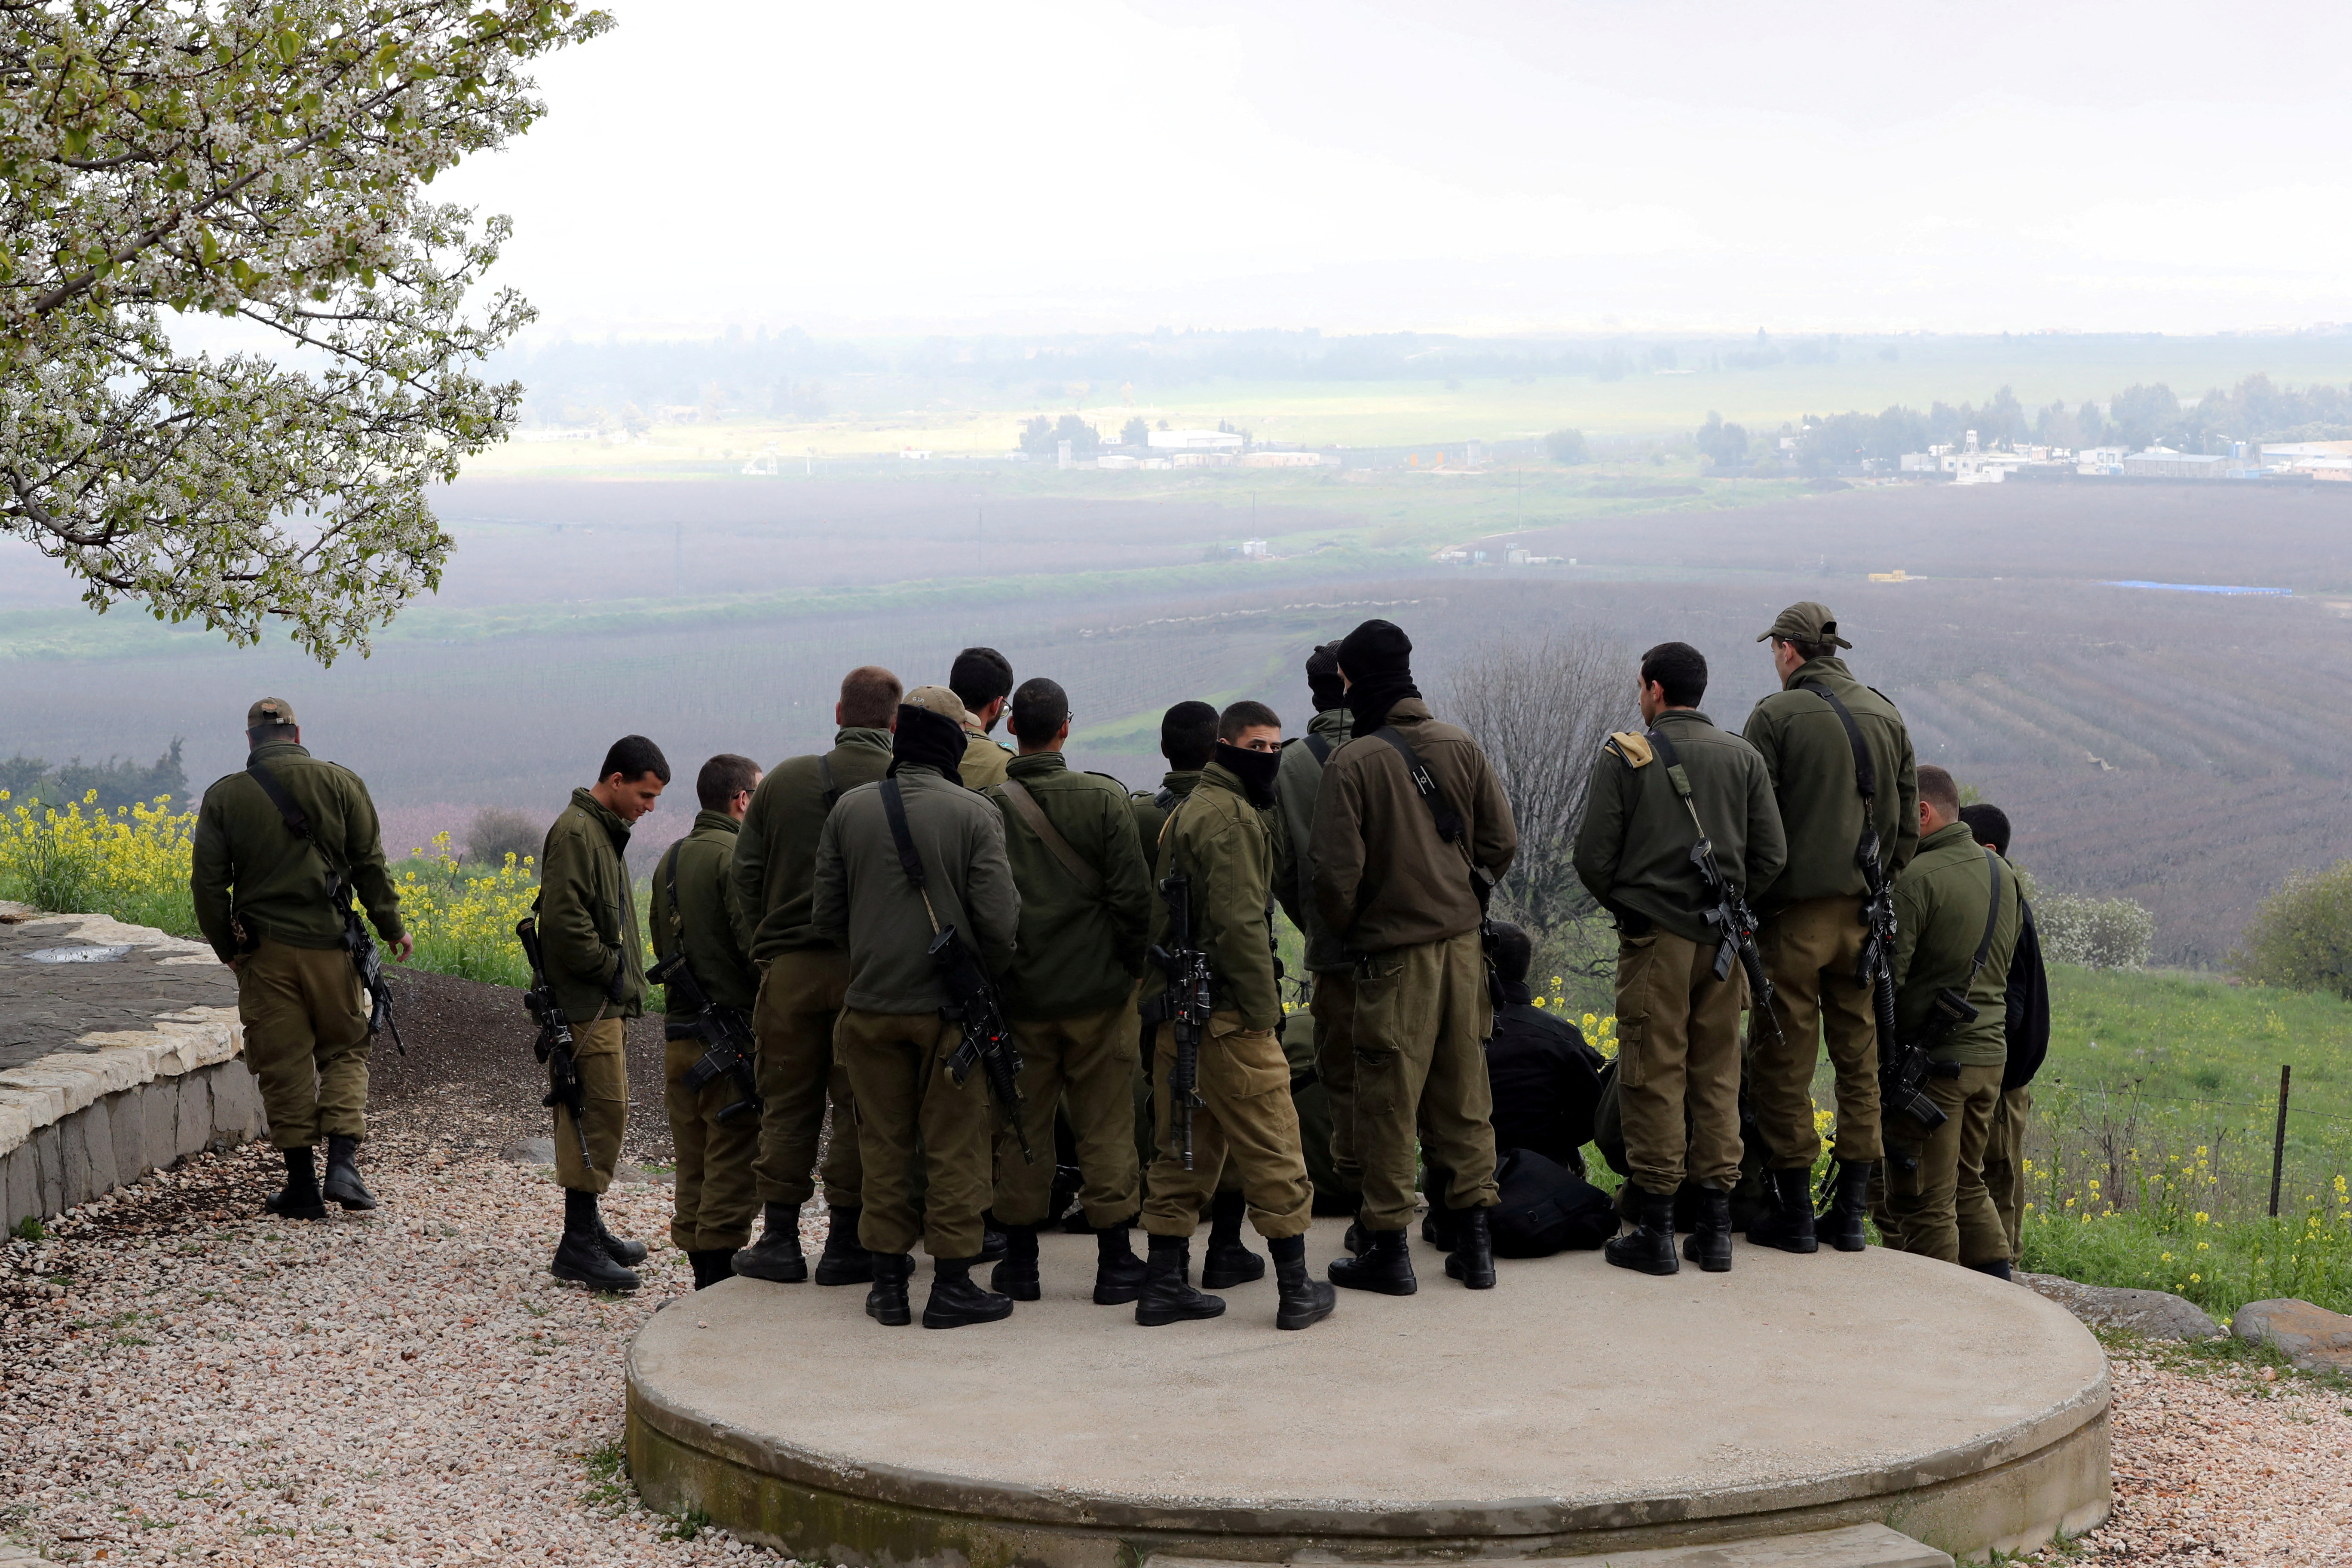 Israeli soldiers stand together at a lookout point near the ceasefire line between Israel and Syria in the Israeli-occupied Golan Heights